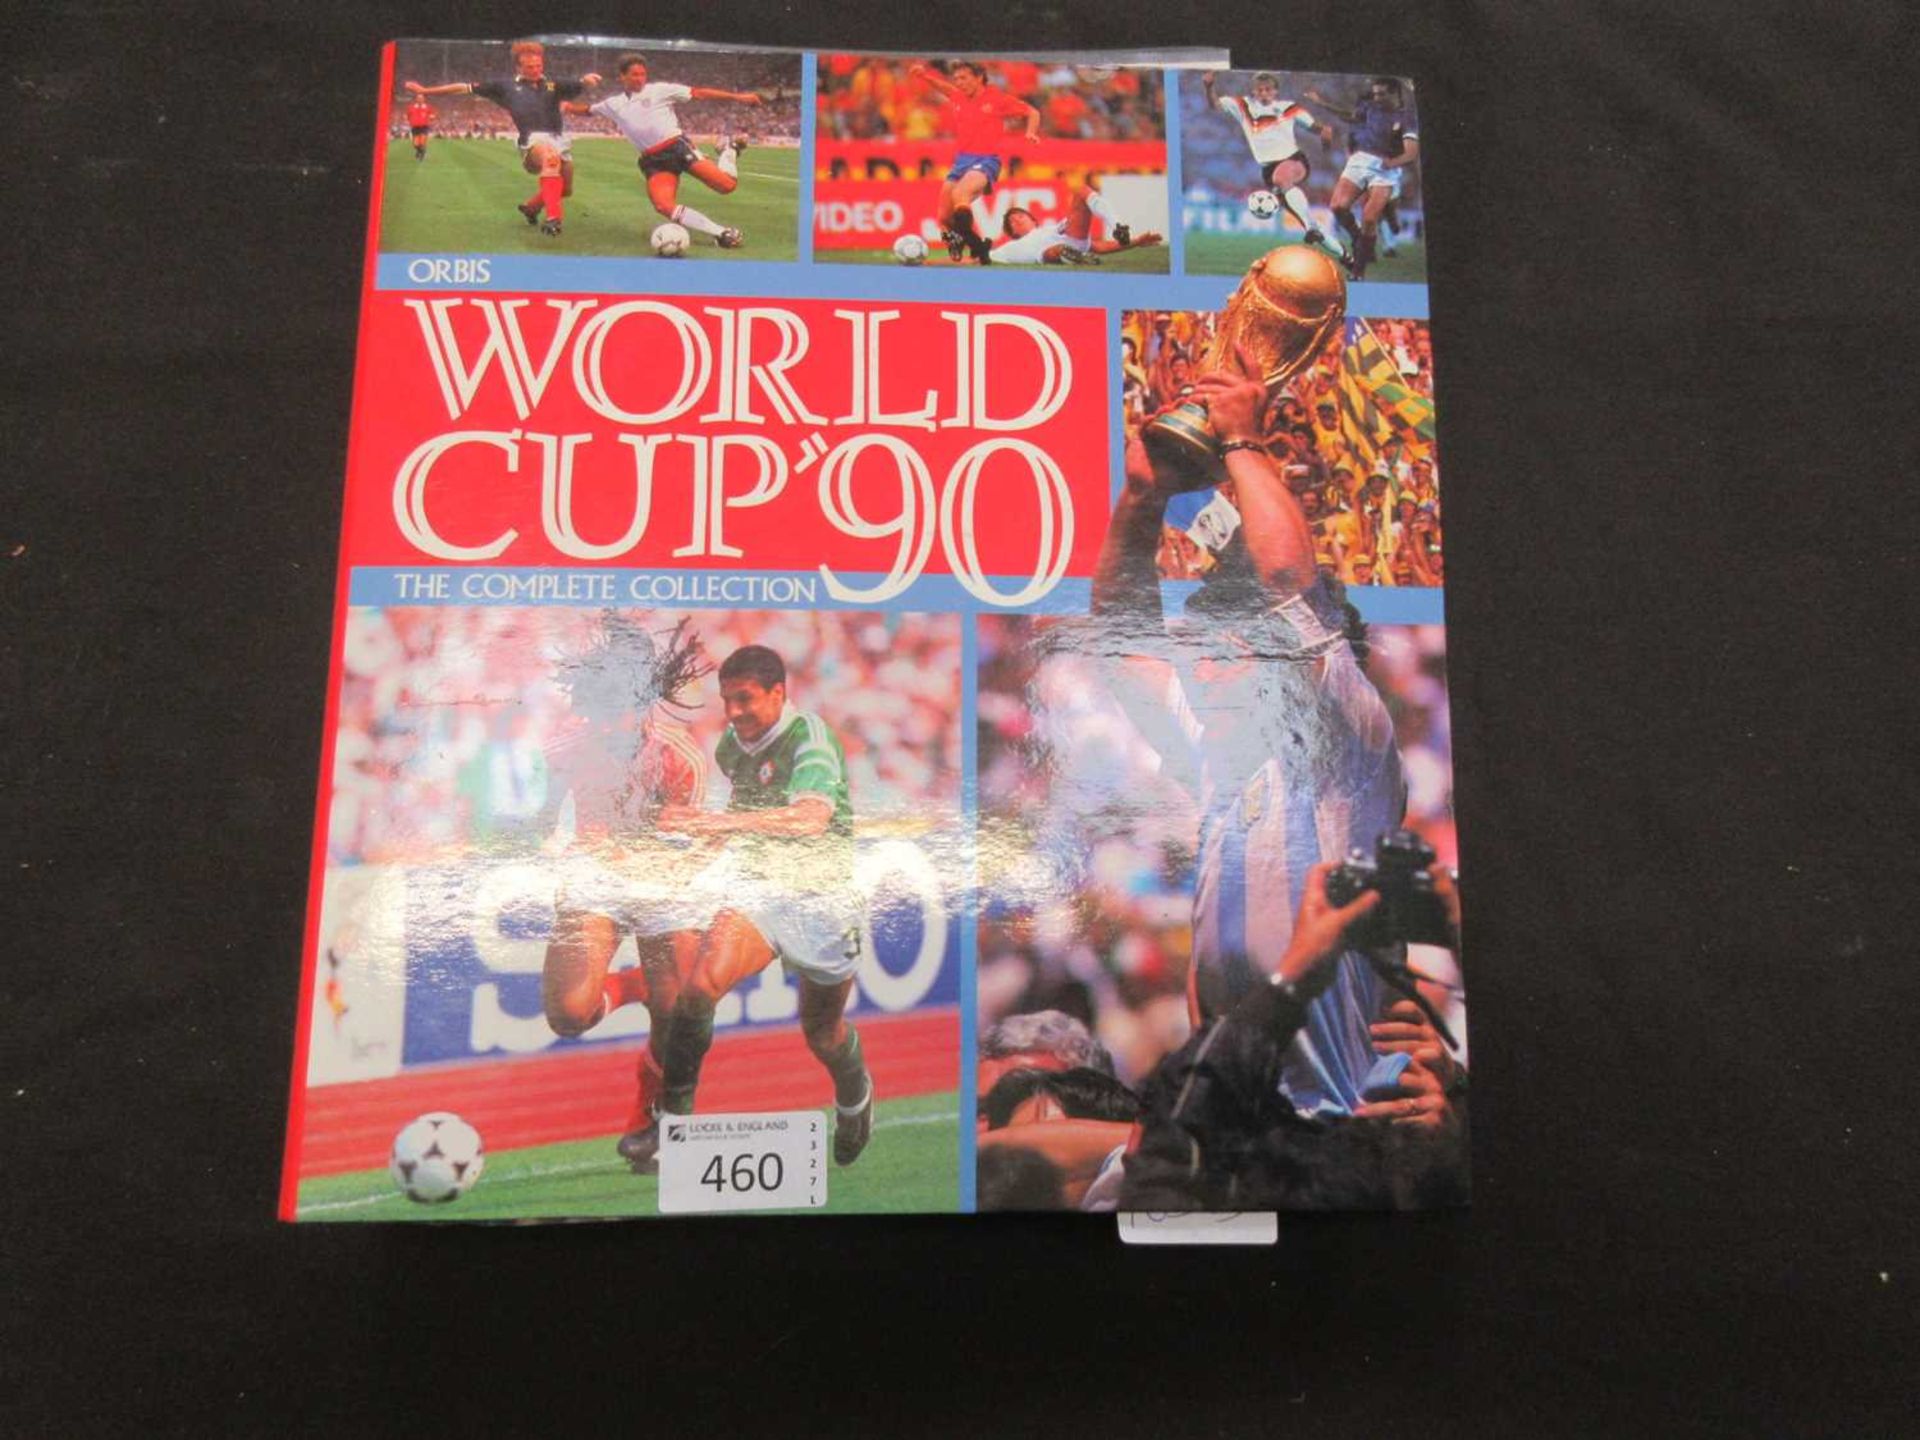 A complete collection of Orbis World Cup 1990 stickers